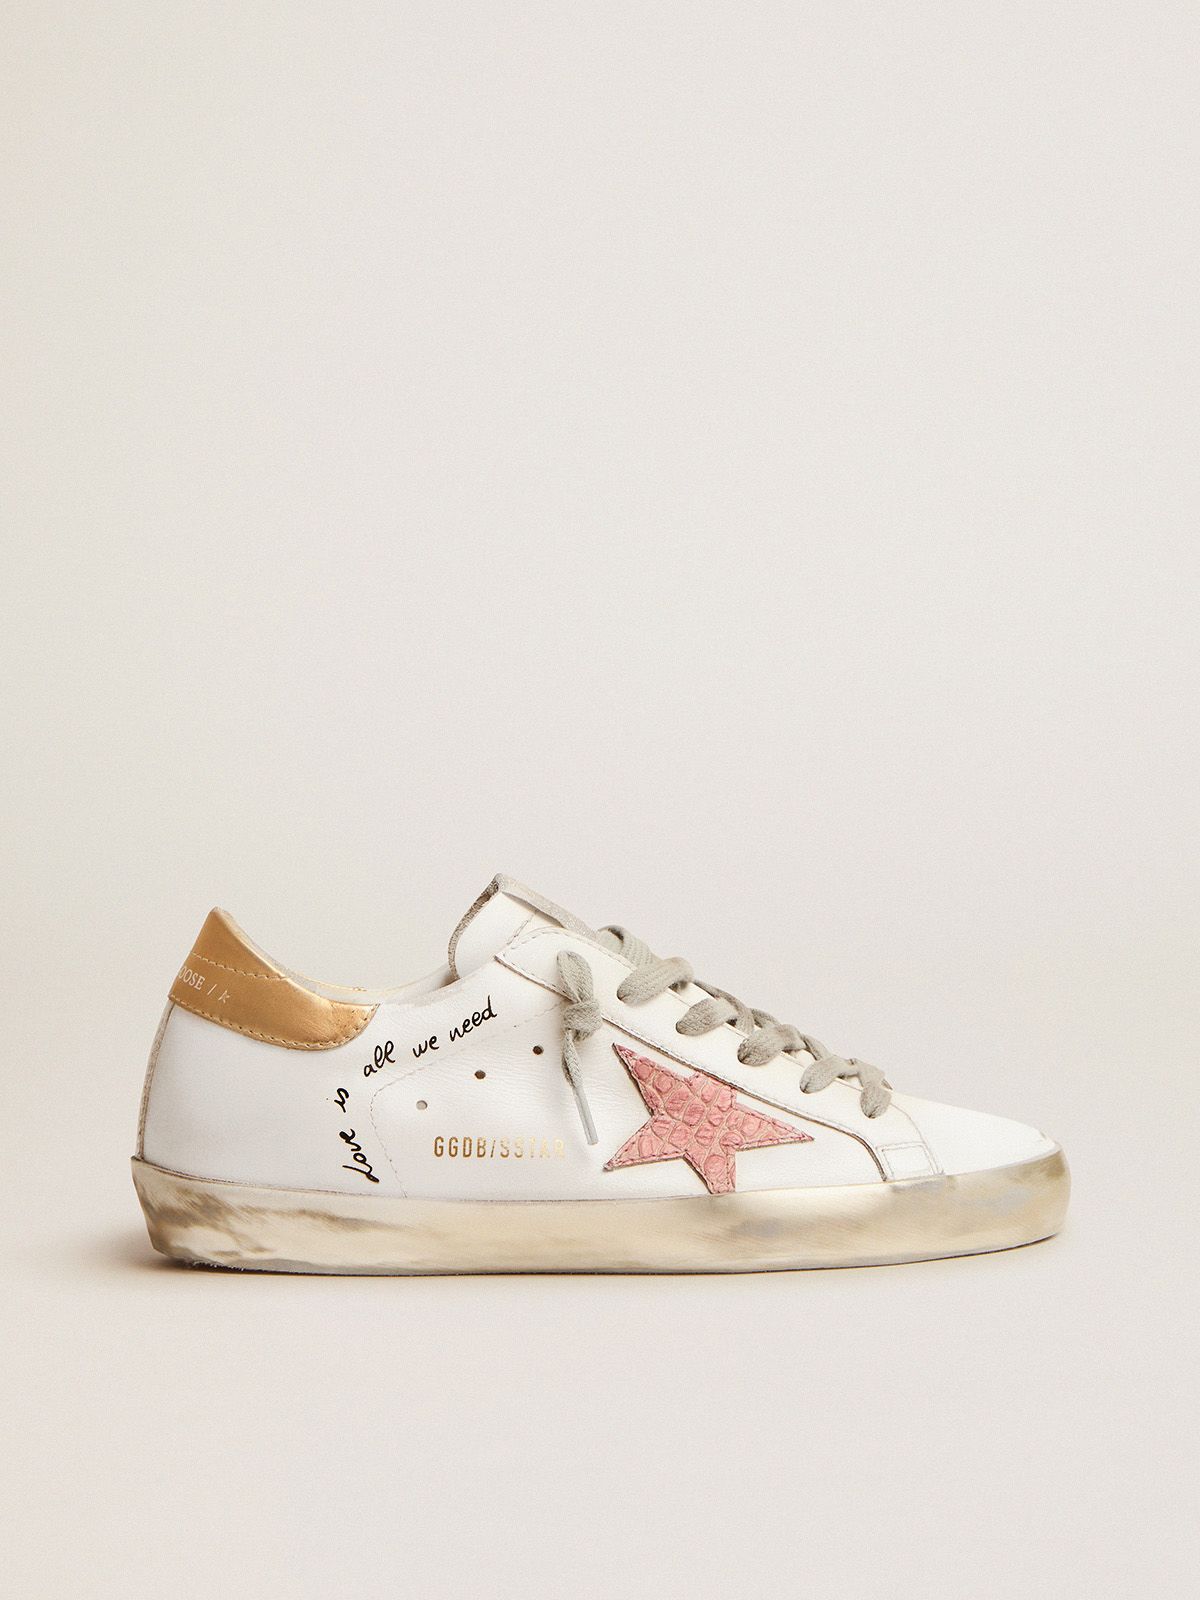 golden goose crocodile-print Super-Star sneakers and with lettering stars handwritten leather